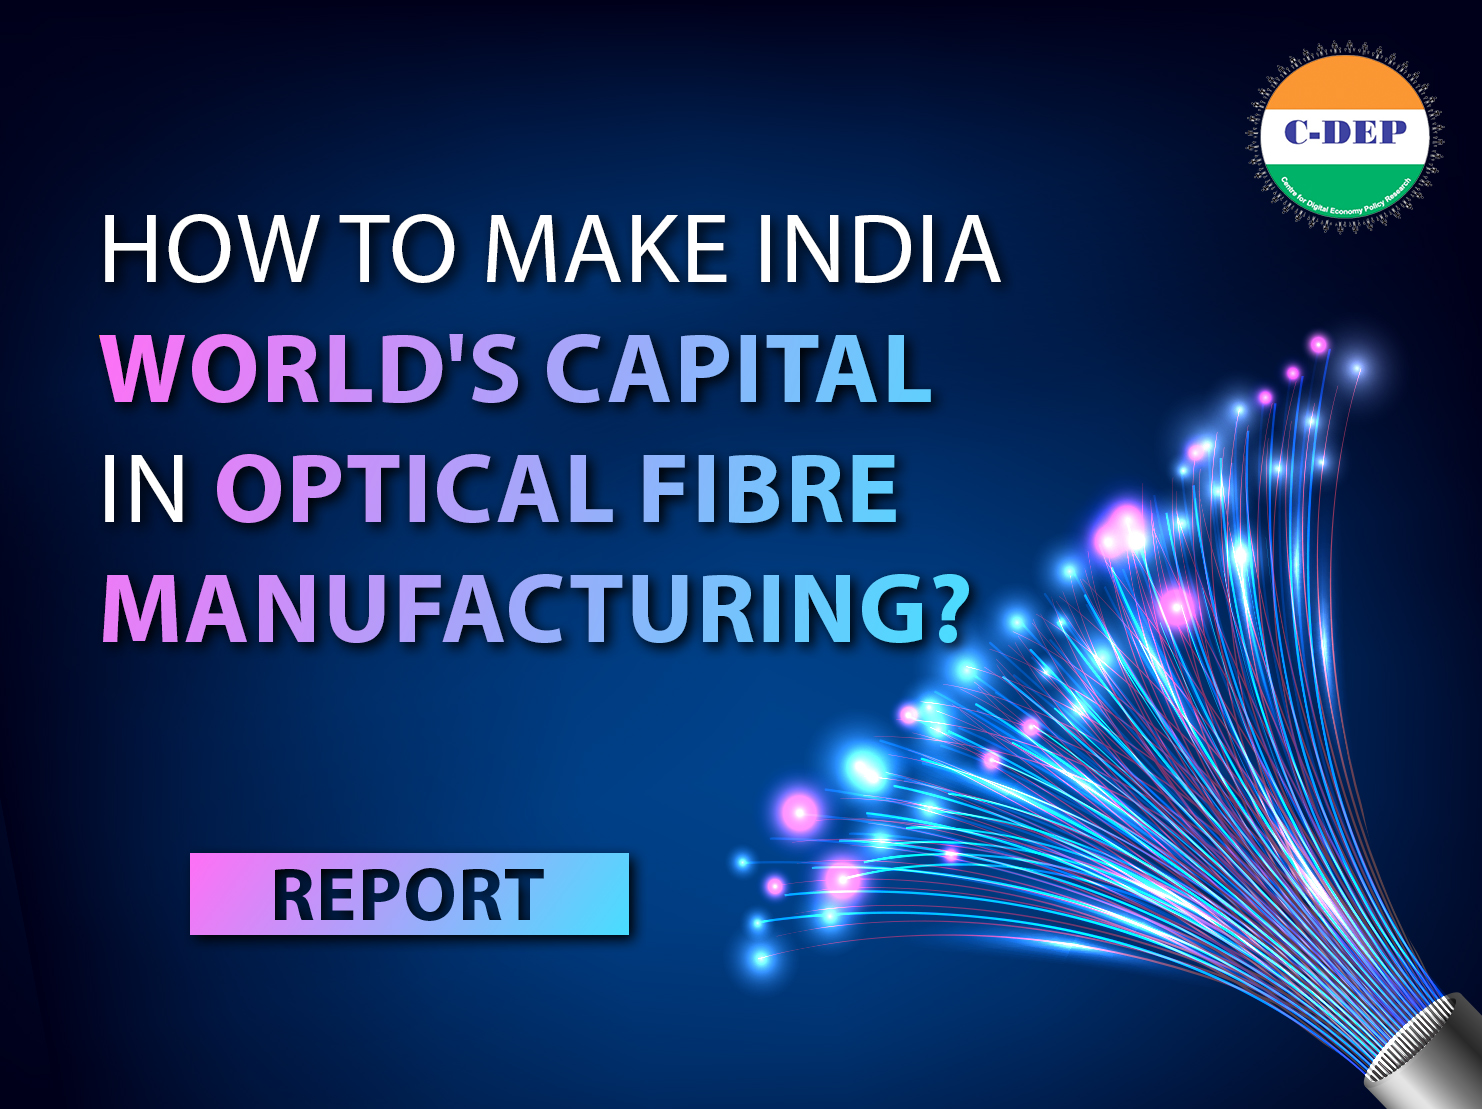 How to Make India World's Capital in Optical Fibre Manufacturing